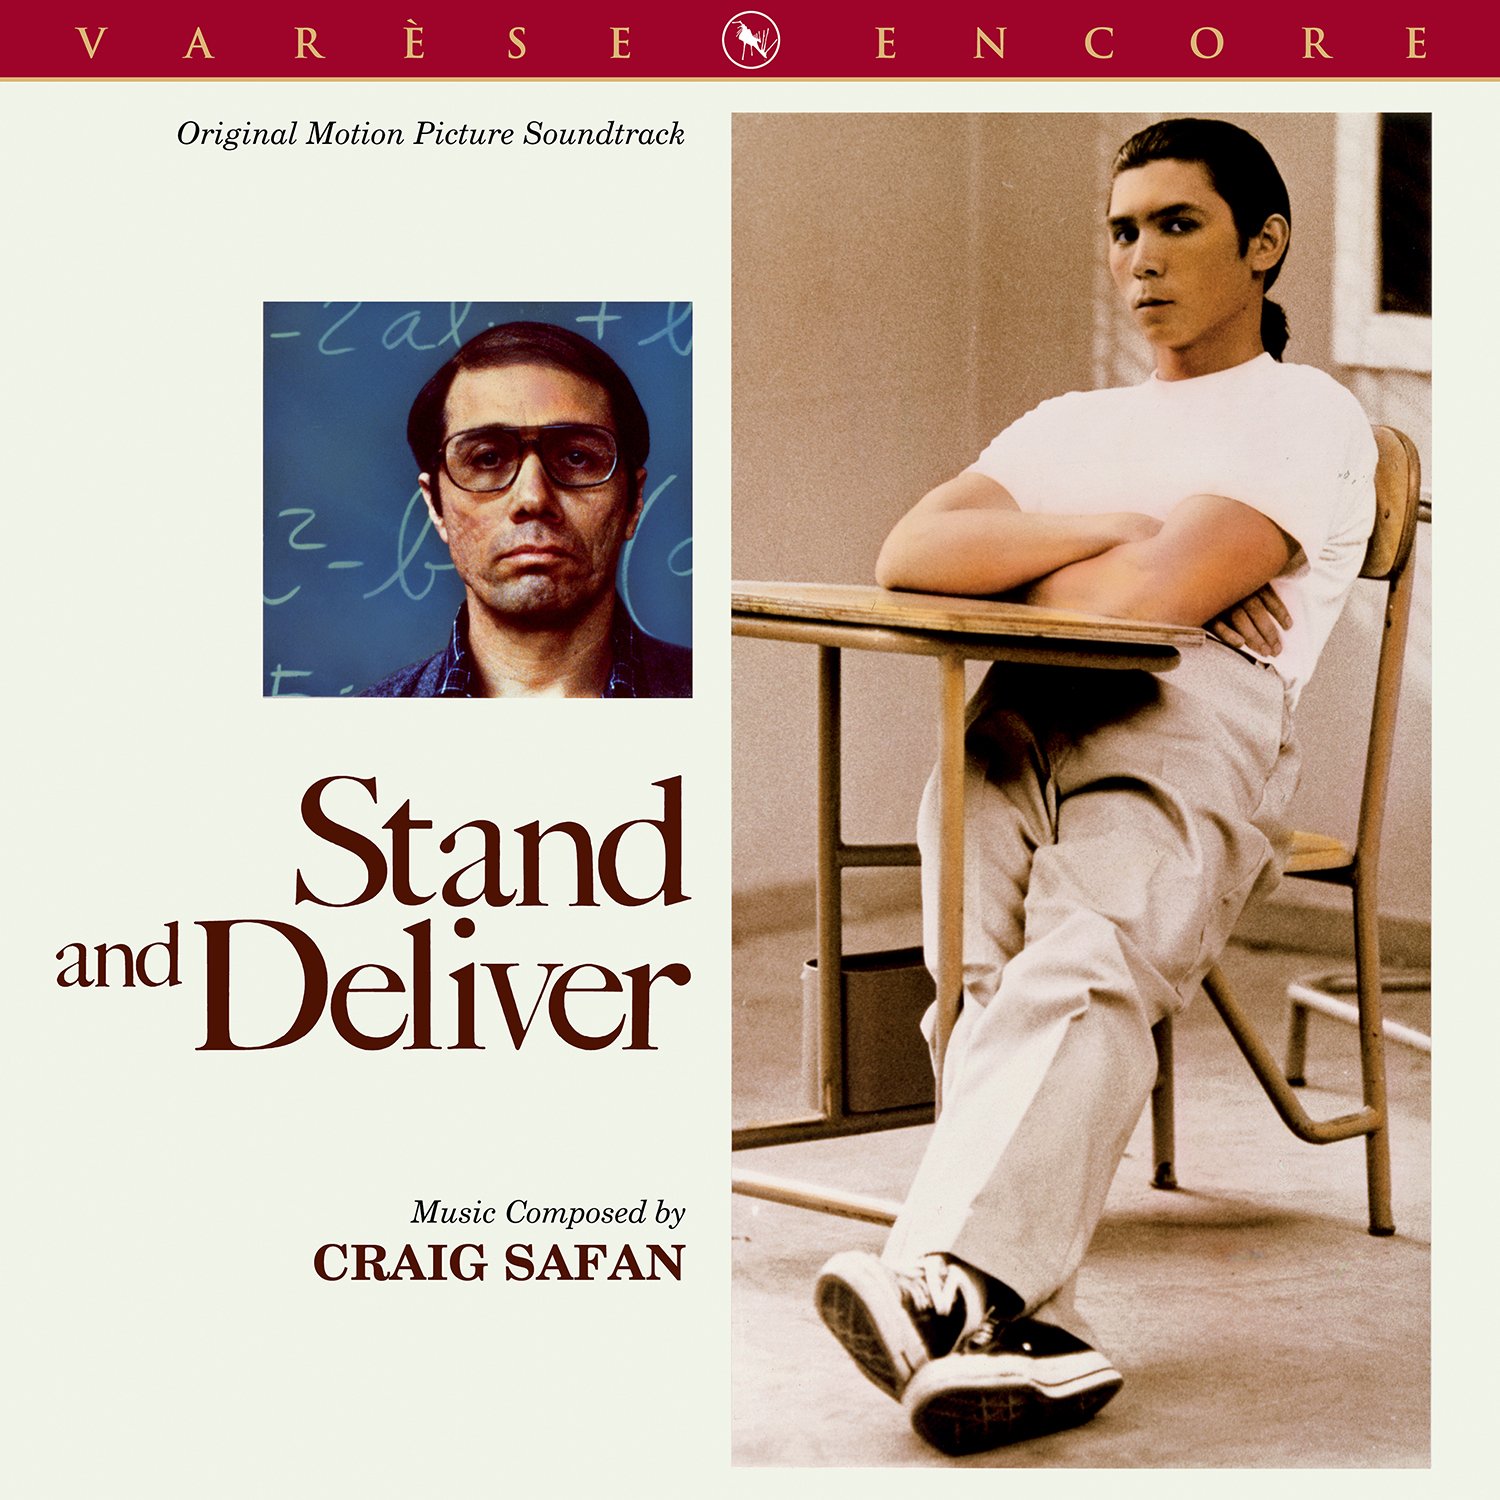 Stand And Deliver (Varse Encore)